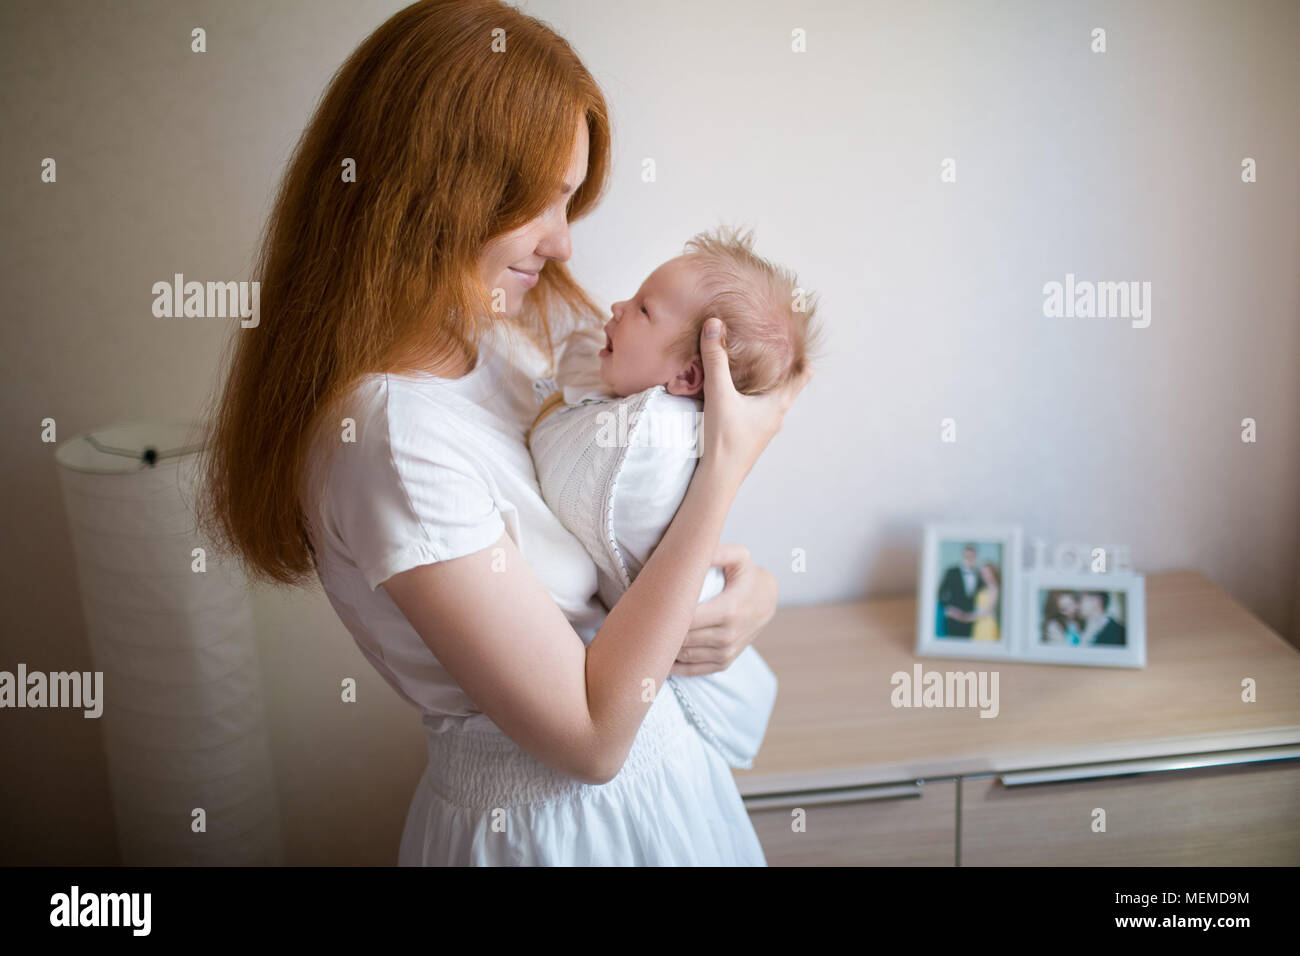 Mom is holding a newborn baby Stock Photo